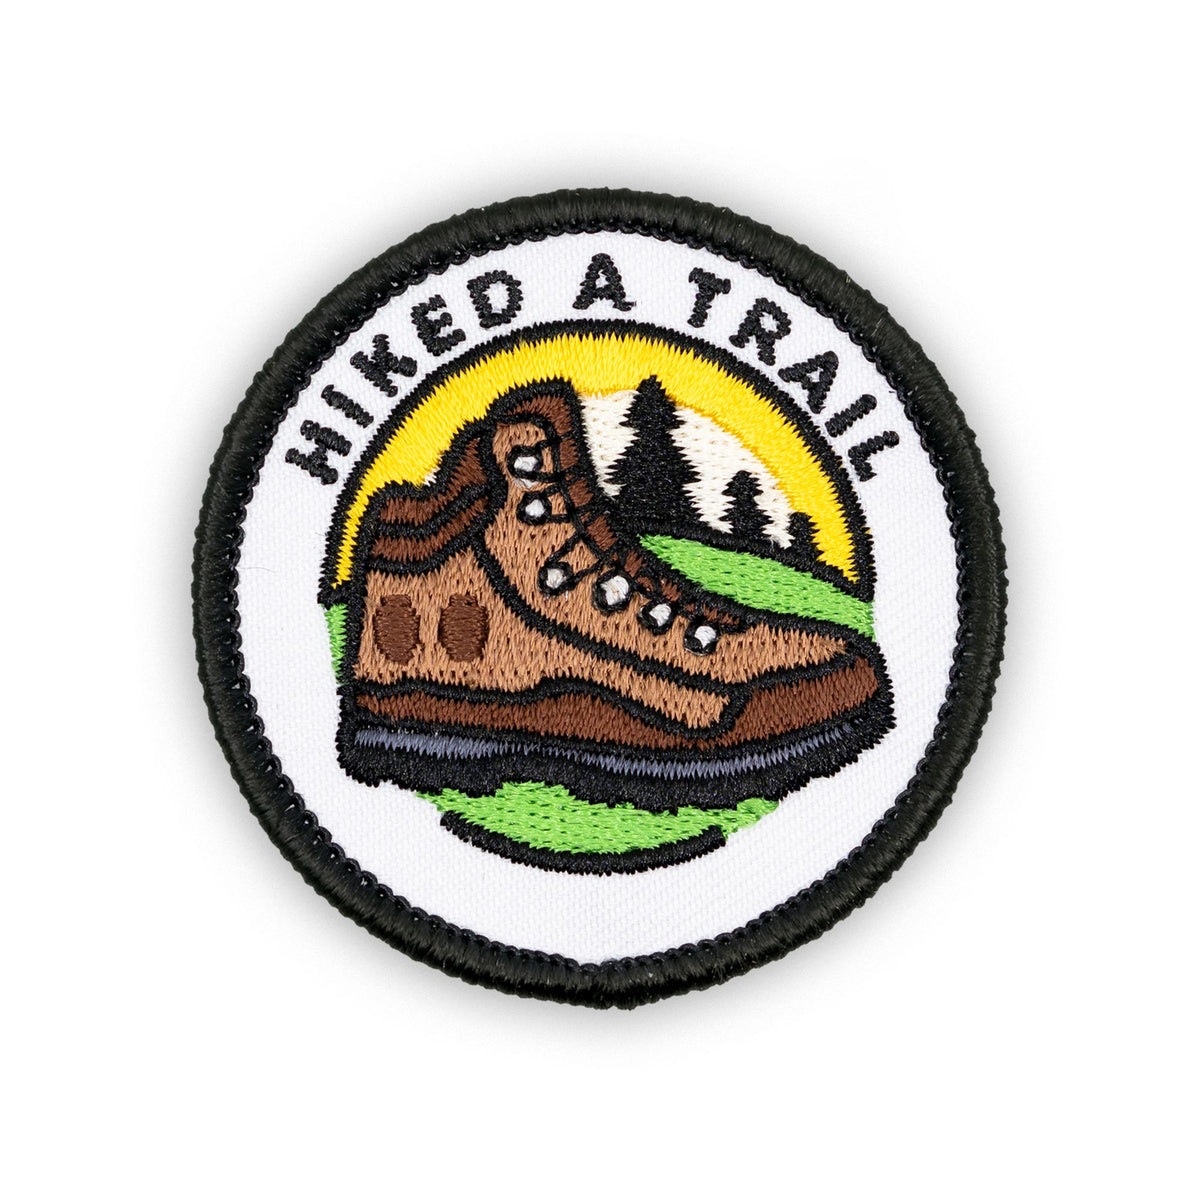 Hiked A Trail adulting merit badge patch for adults